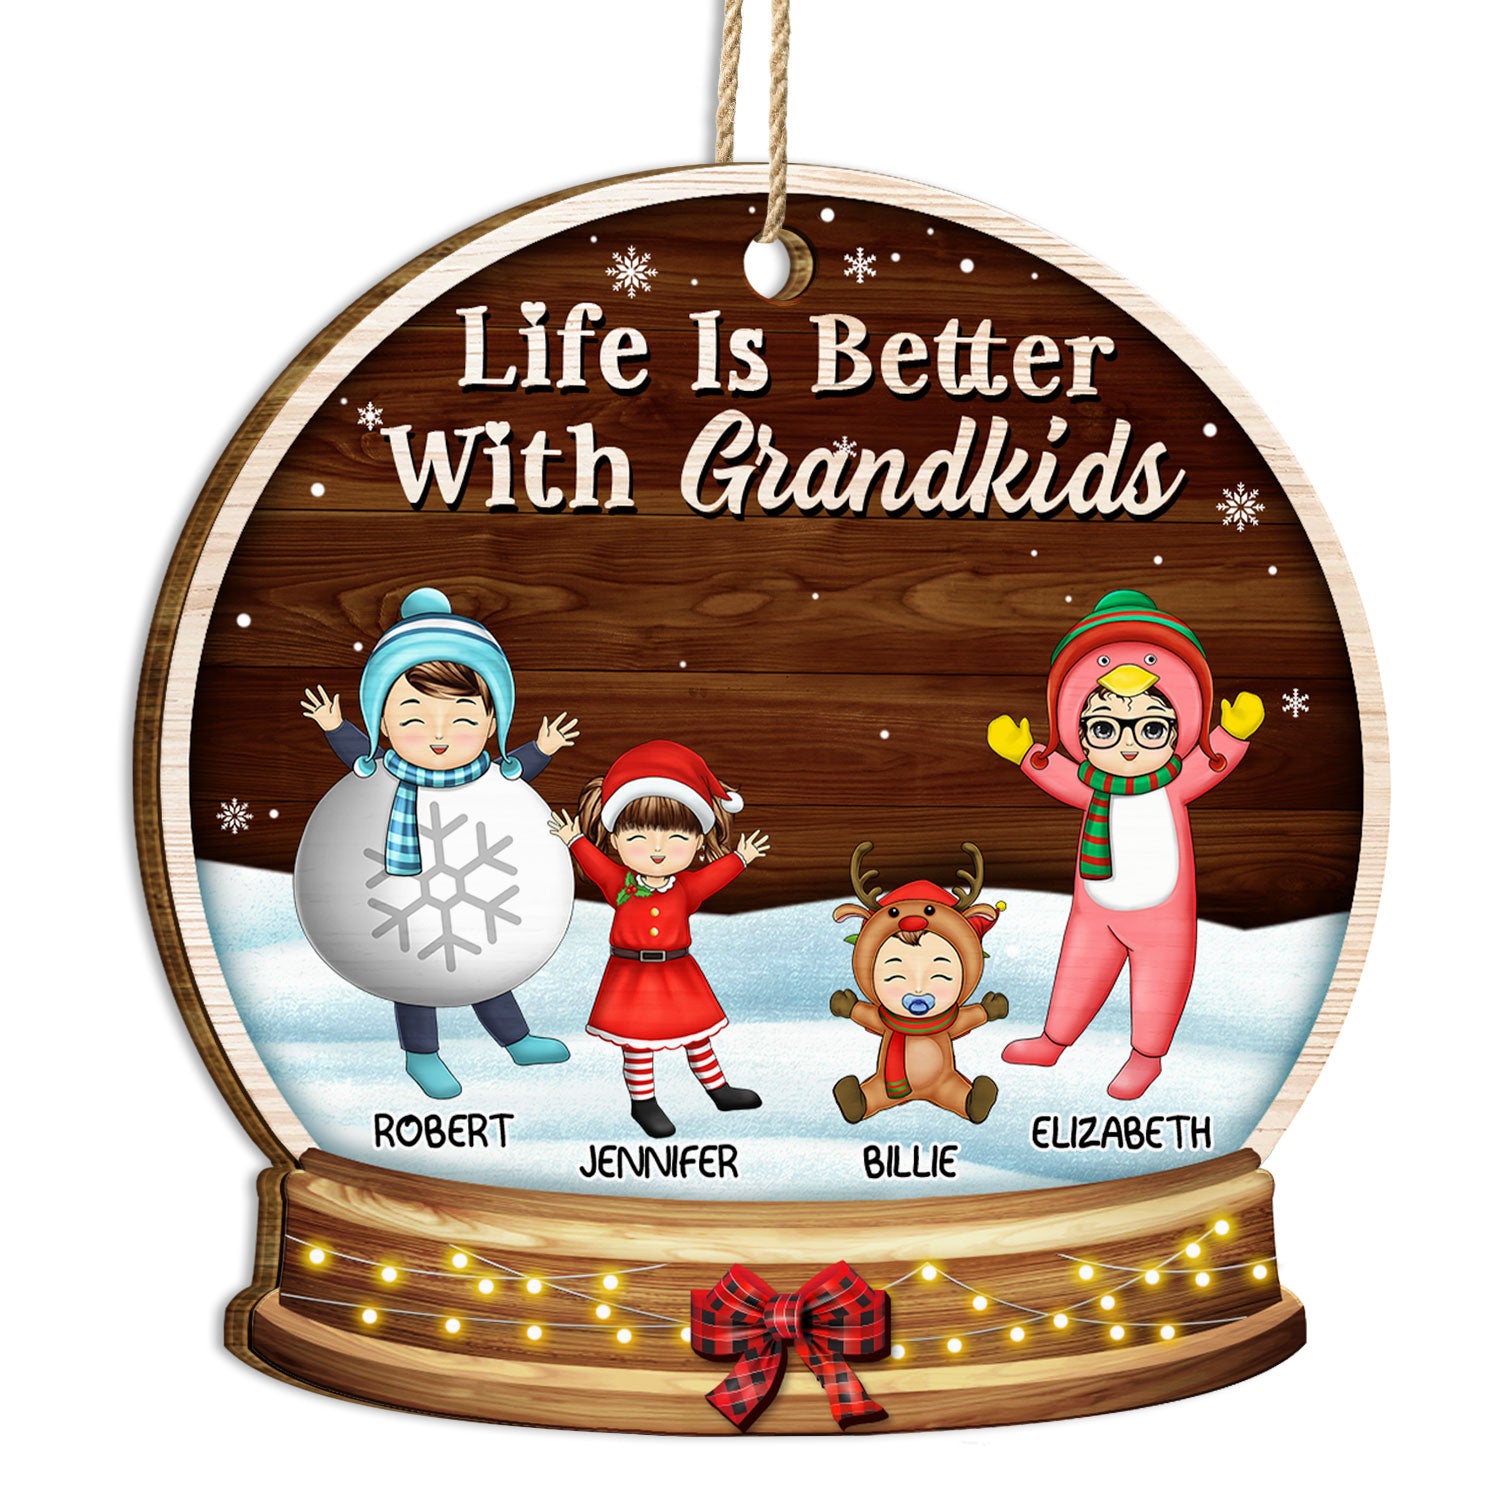 Life Is Better With Grandkids Cosplay - Christmas, Loving Gift For Grandpa, Grandma, Grandparents - Personalized Custom Shaped Wooden Ornament